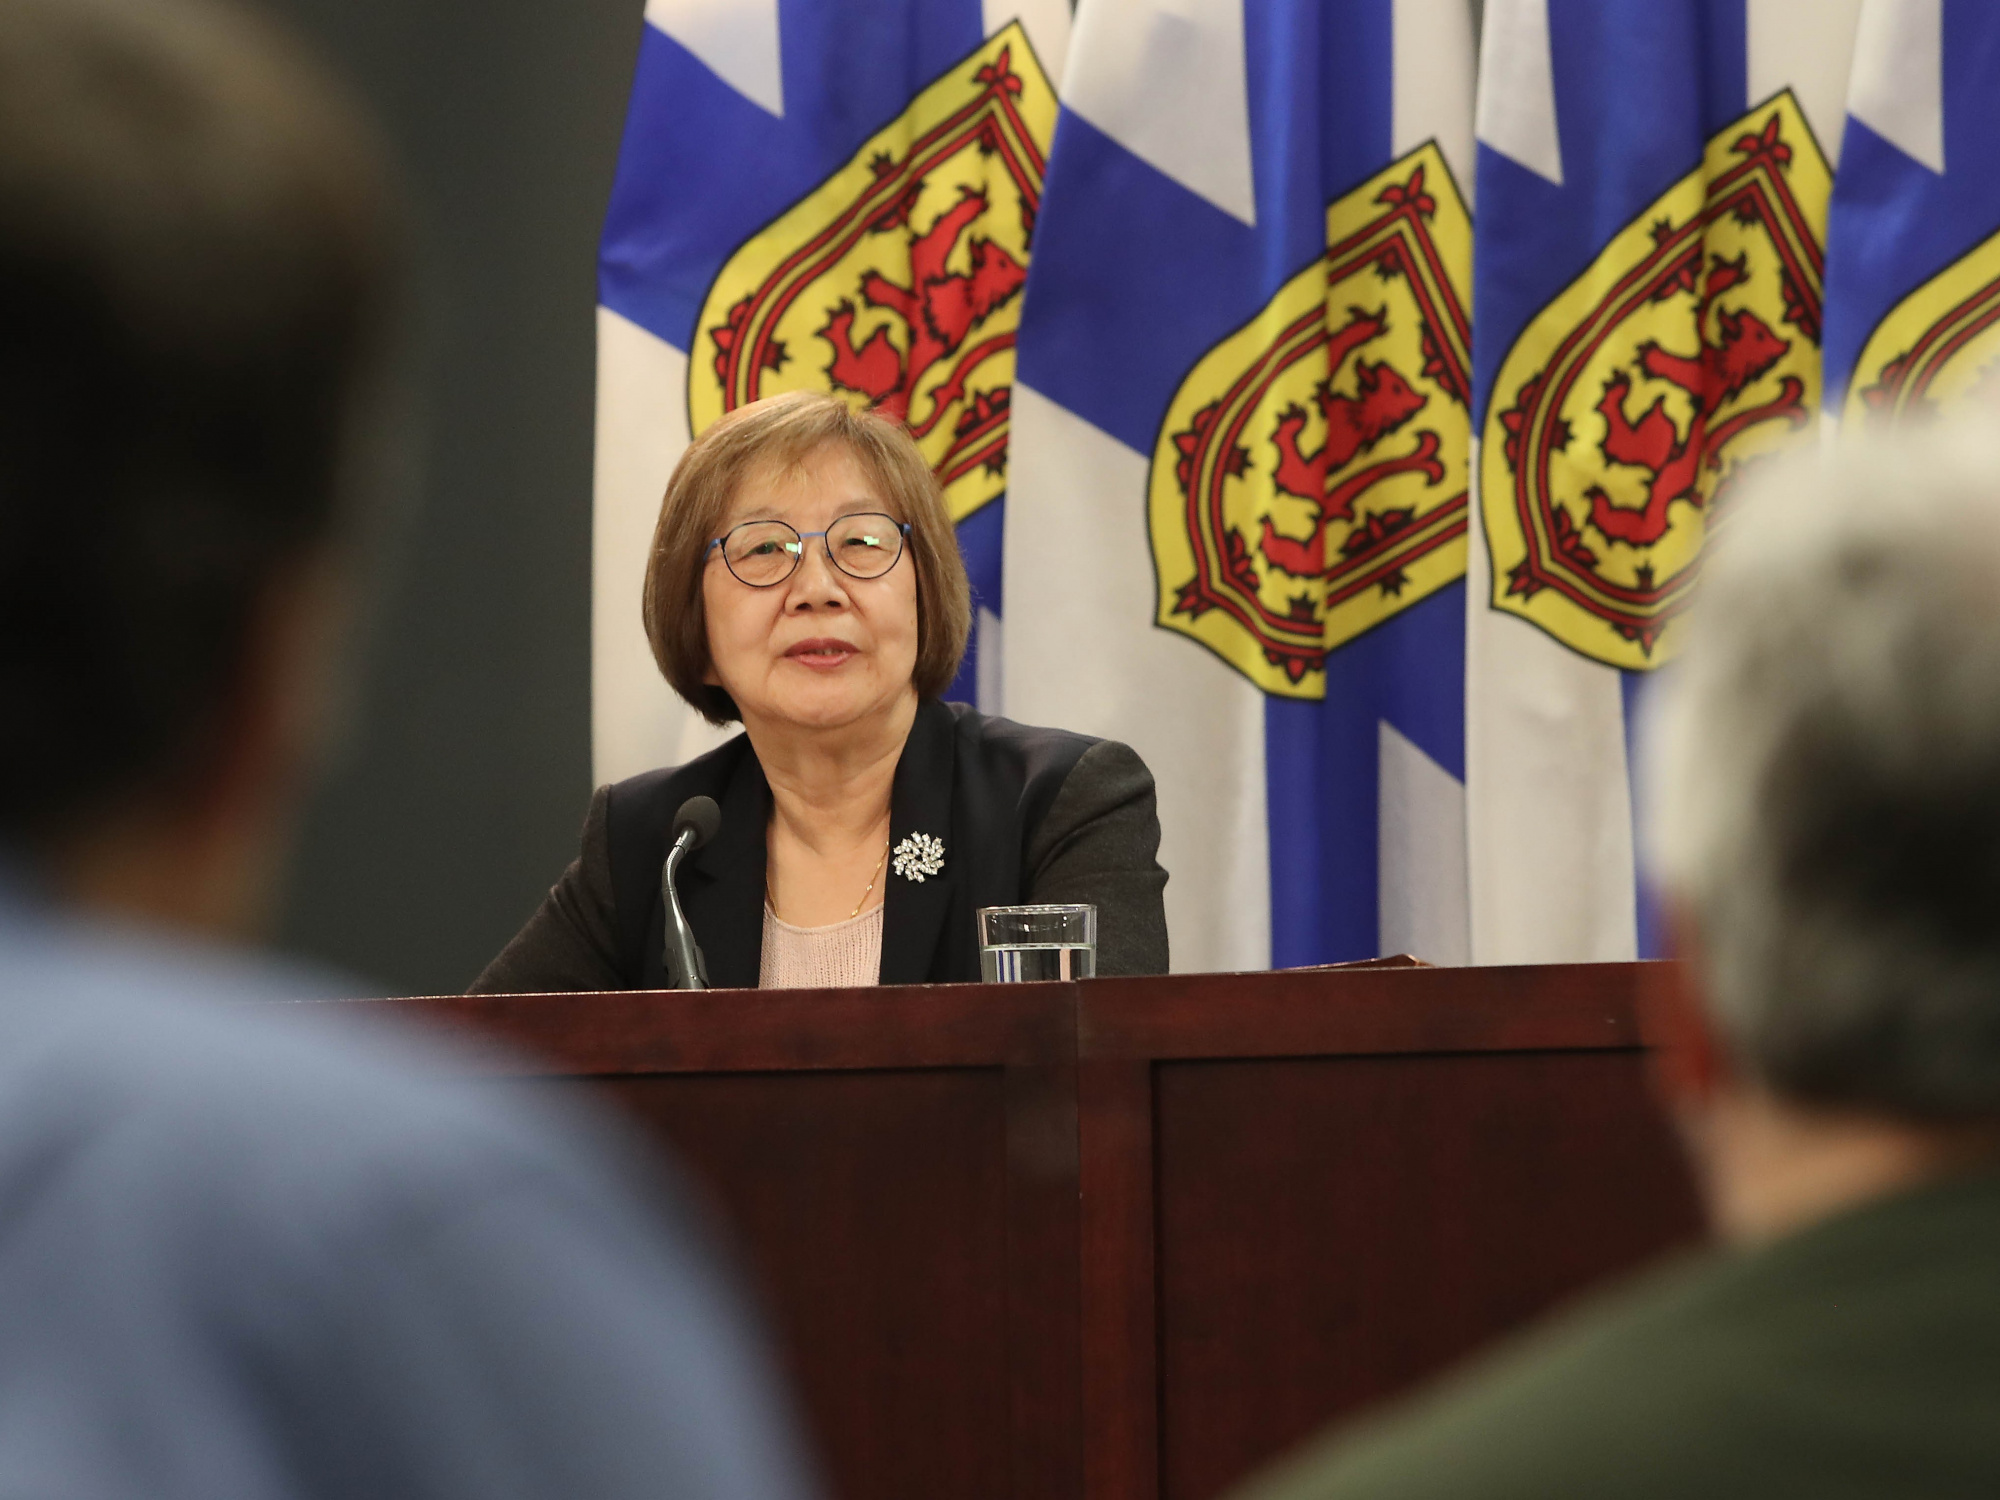 Linda Lee Oland, Founding Chair of the Progress Monitoring Committee, during a media availability in Halifax